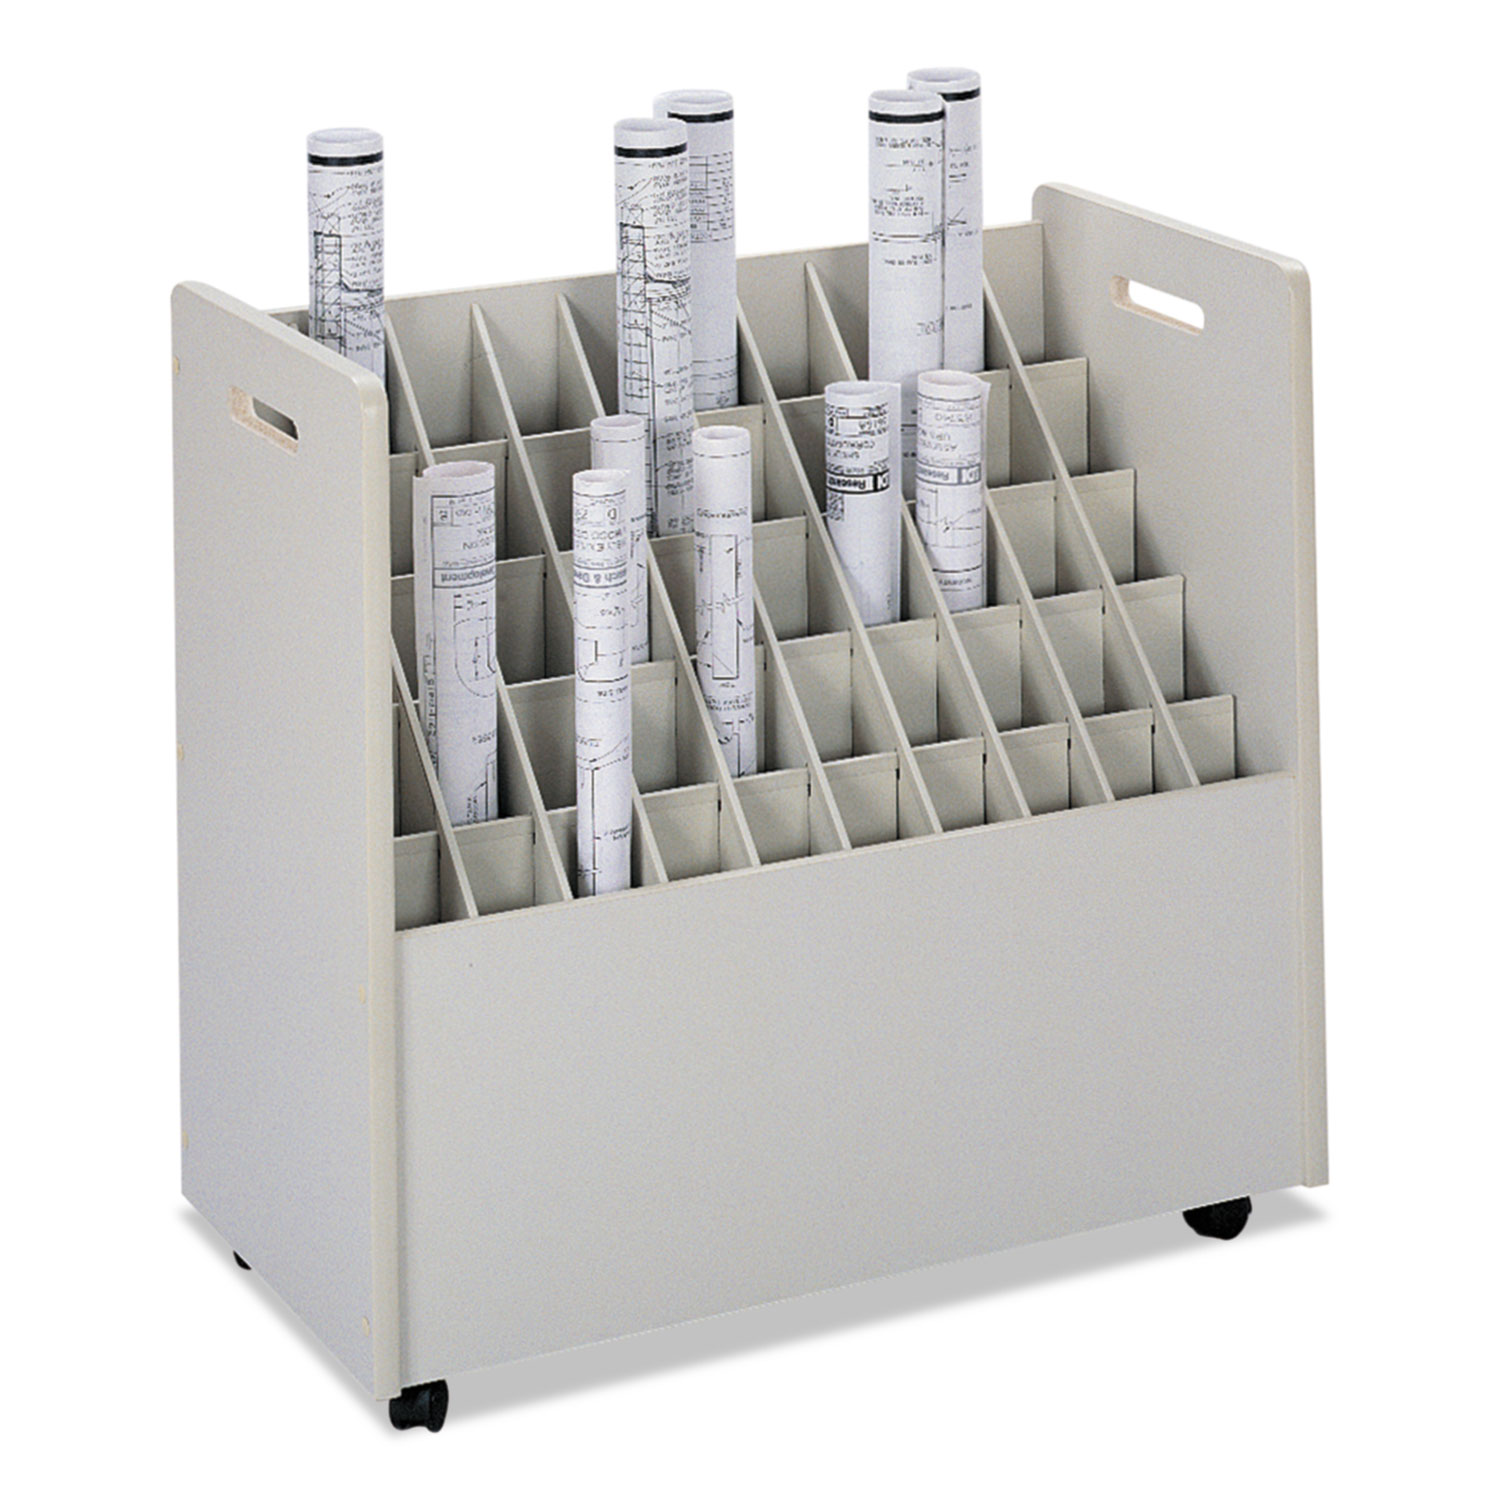  Safco 3083 Laminate Mobile Roll Files, 50 Compartments, 30.25w x 15.75d x 29.25h, Putty (SAF3083) 